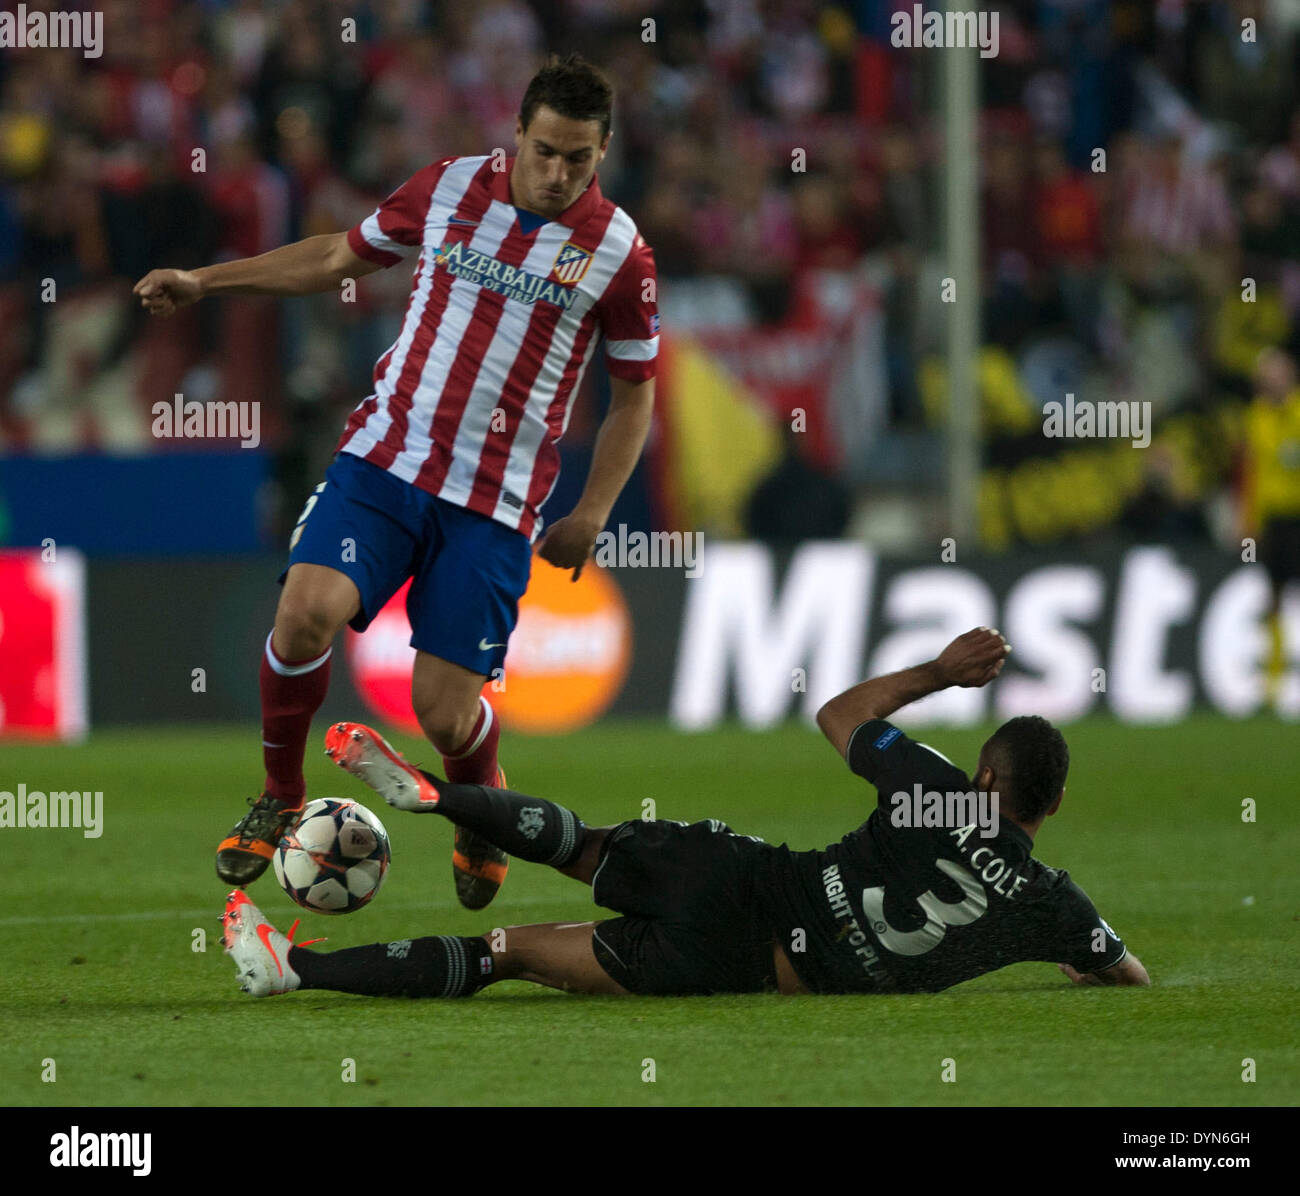 Madrid, Spain. 22nd Apr, 2014. Chelsea's Ashley Cole(down) vies for the ball during the Champions League semi-final first leg soccer match against Atletico Madrid in Madrid, Spain, April 22, 2014. The match ended with a 0-0 draw. Credit:  Xie Haining/Xinhua/Alamy Live News Stock Photo